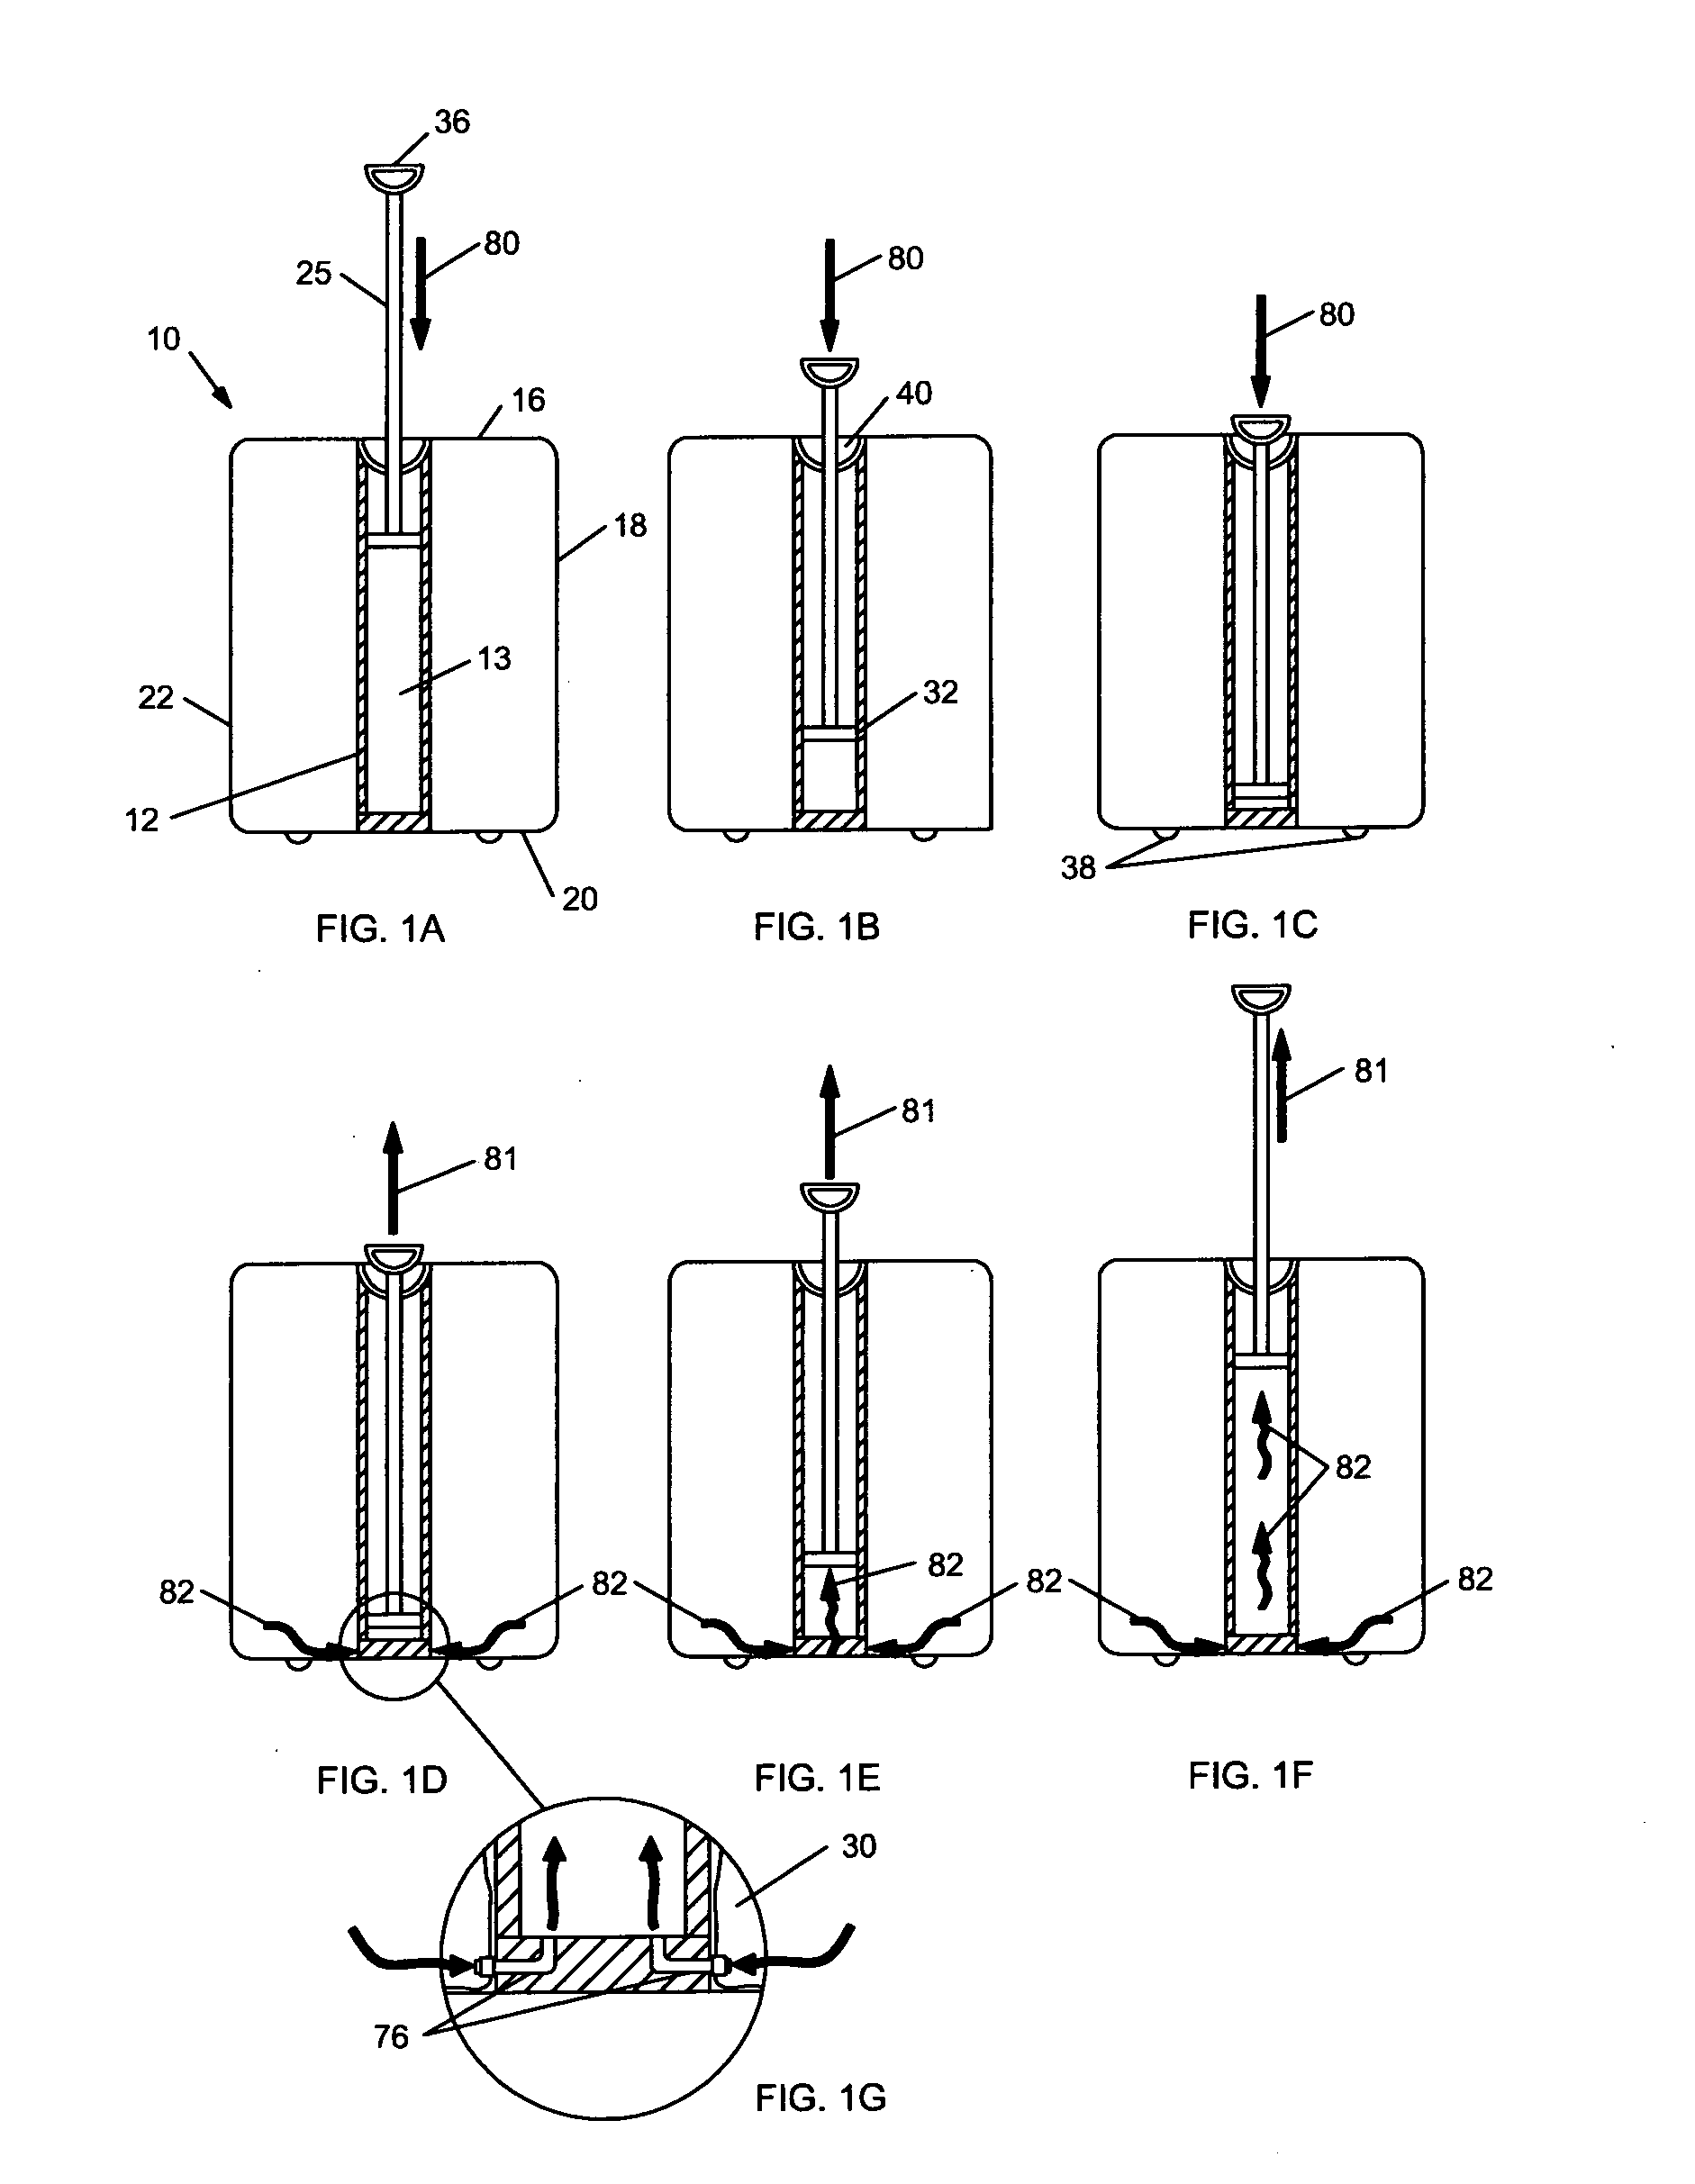 Luggage Comprising a Vacuum Device